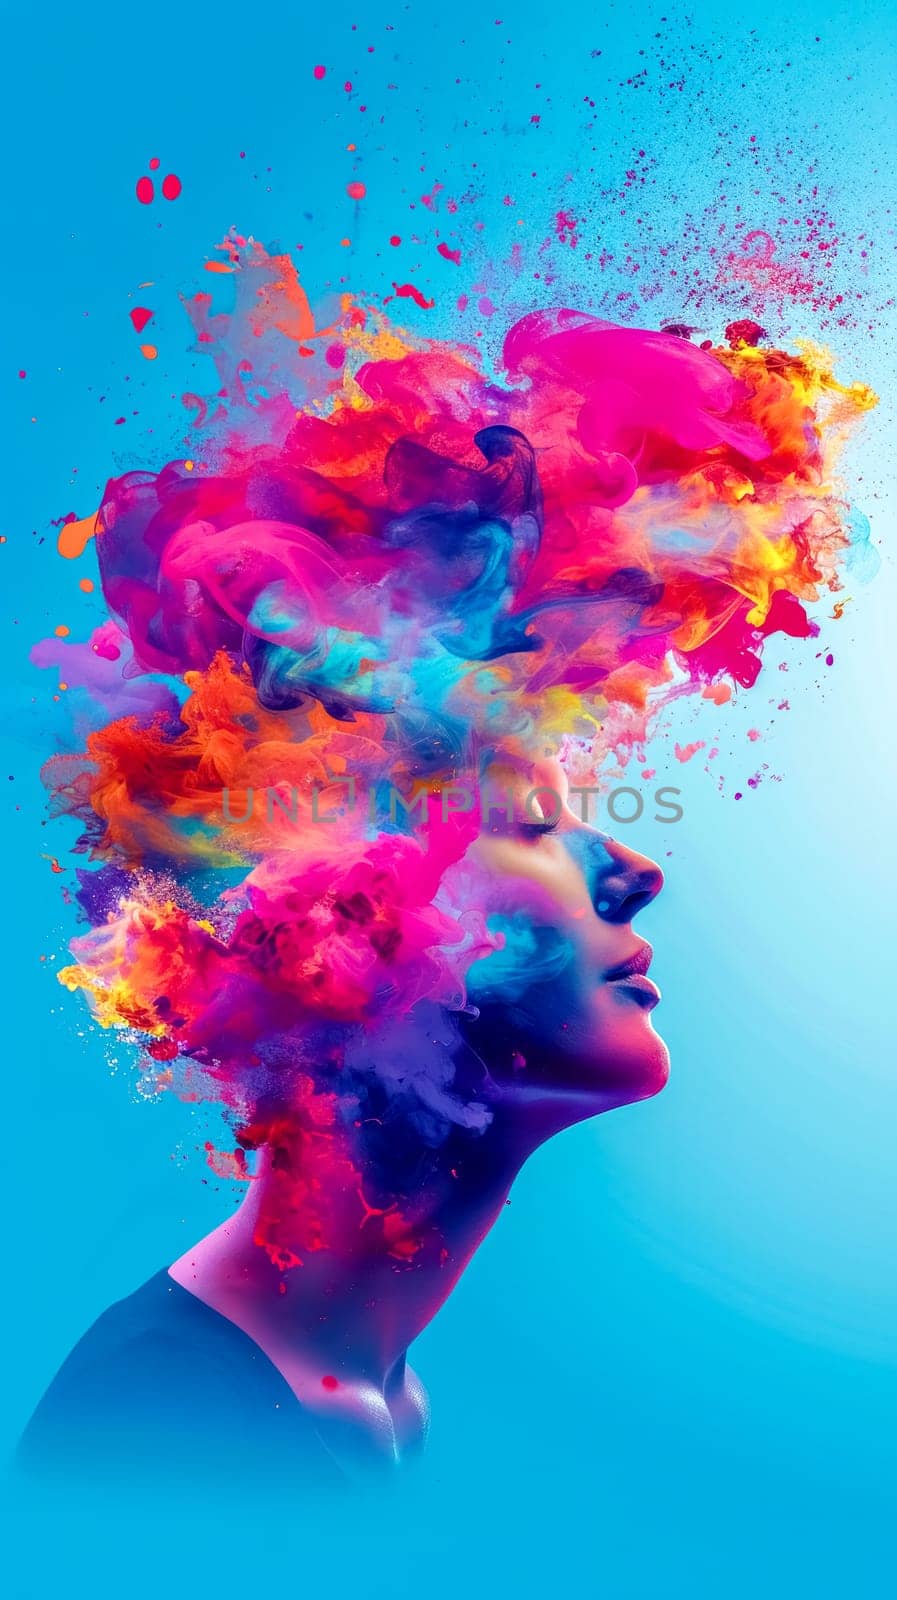 woman's profile with her head transforming into a vibrant explosion of colors and paint splatters, symbolizing creativity, imagination, and the unleashing of ideas or the freeing of the mind, vertical